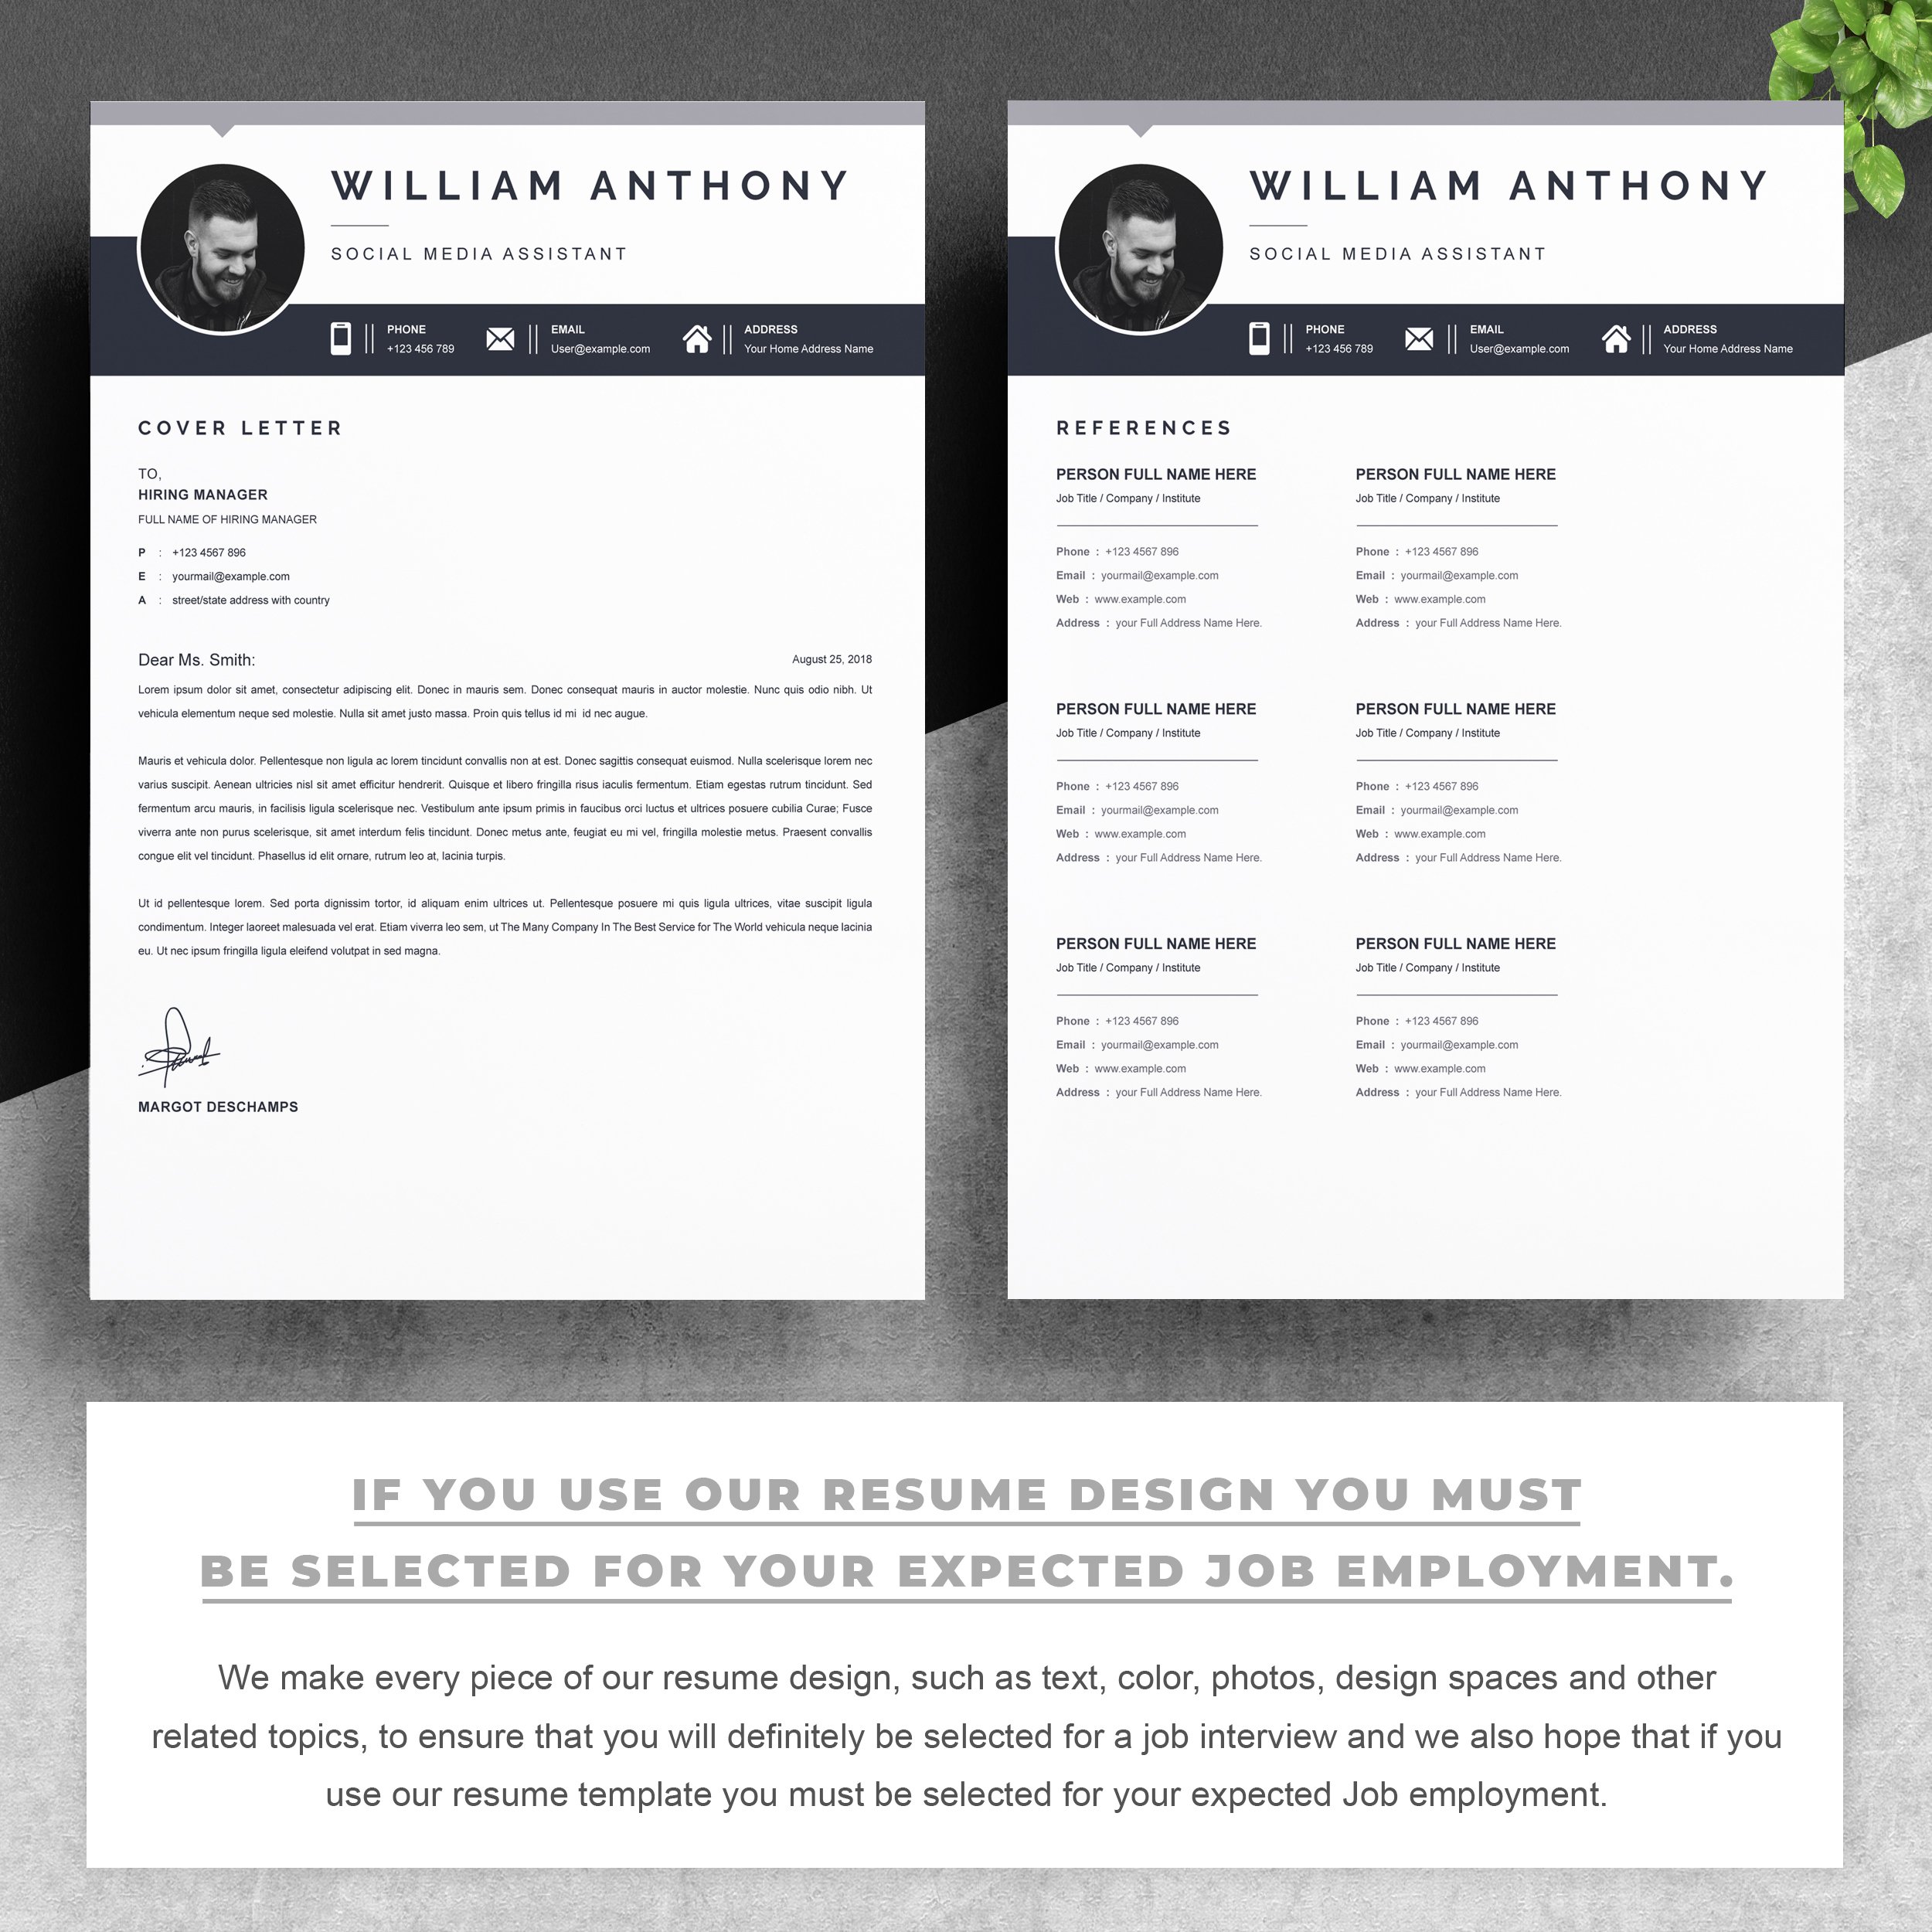 03 2 pages free resume design template copy 885